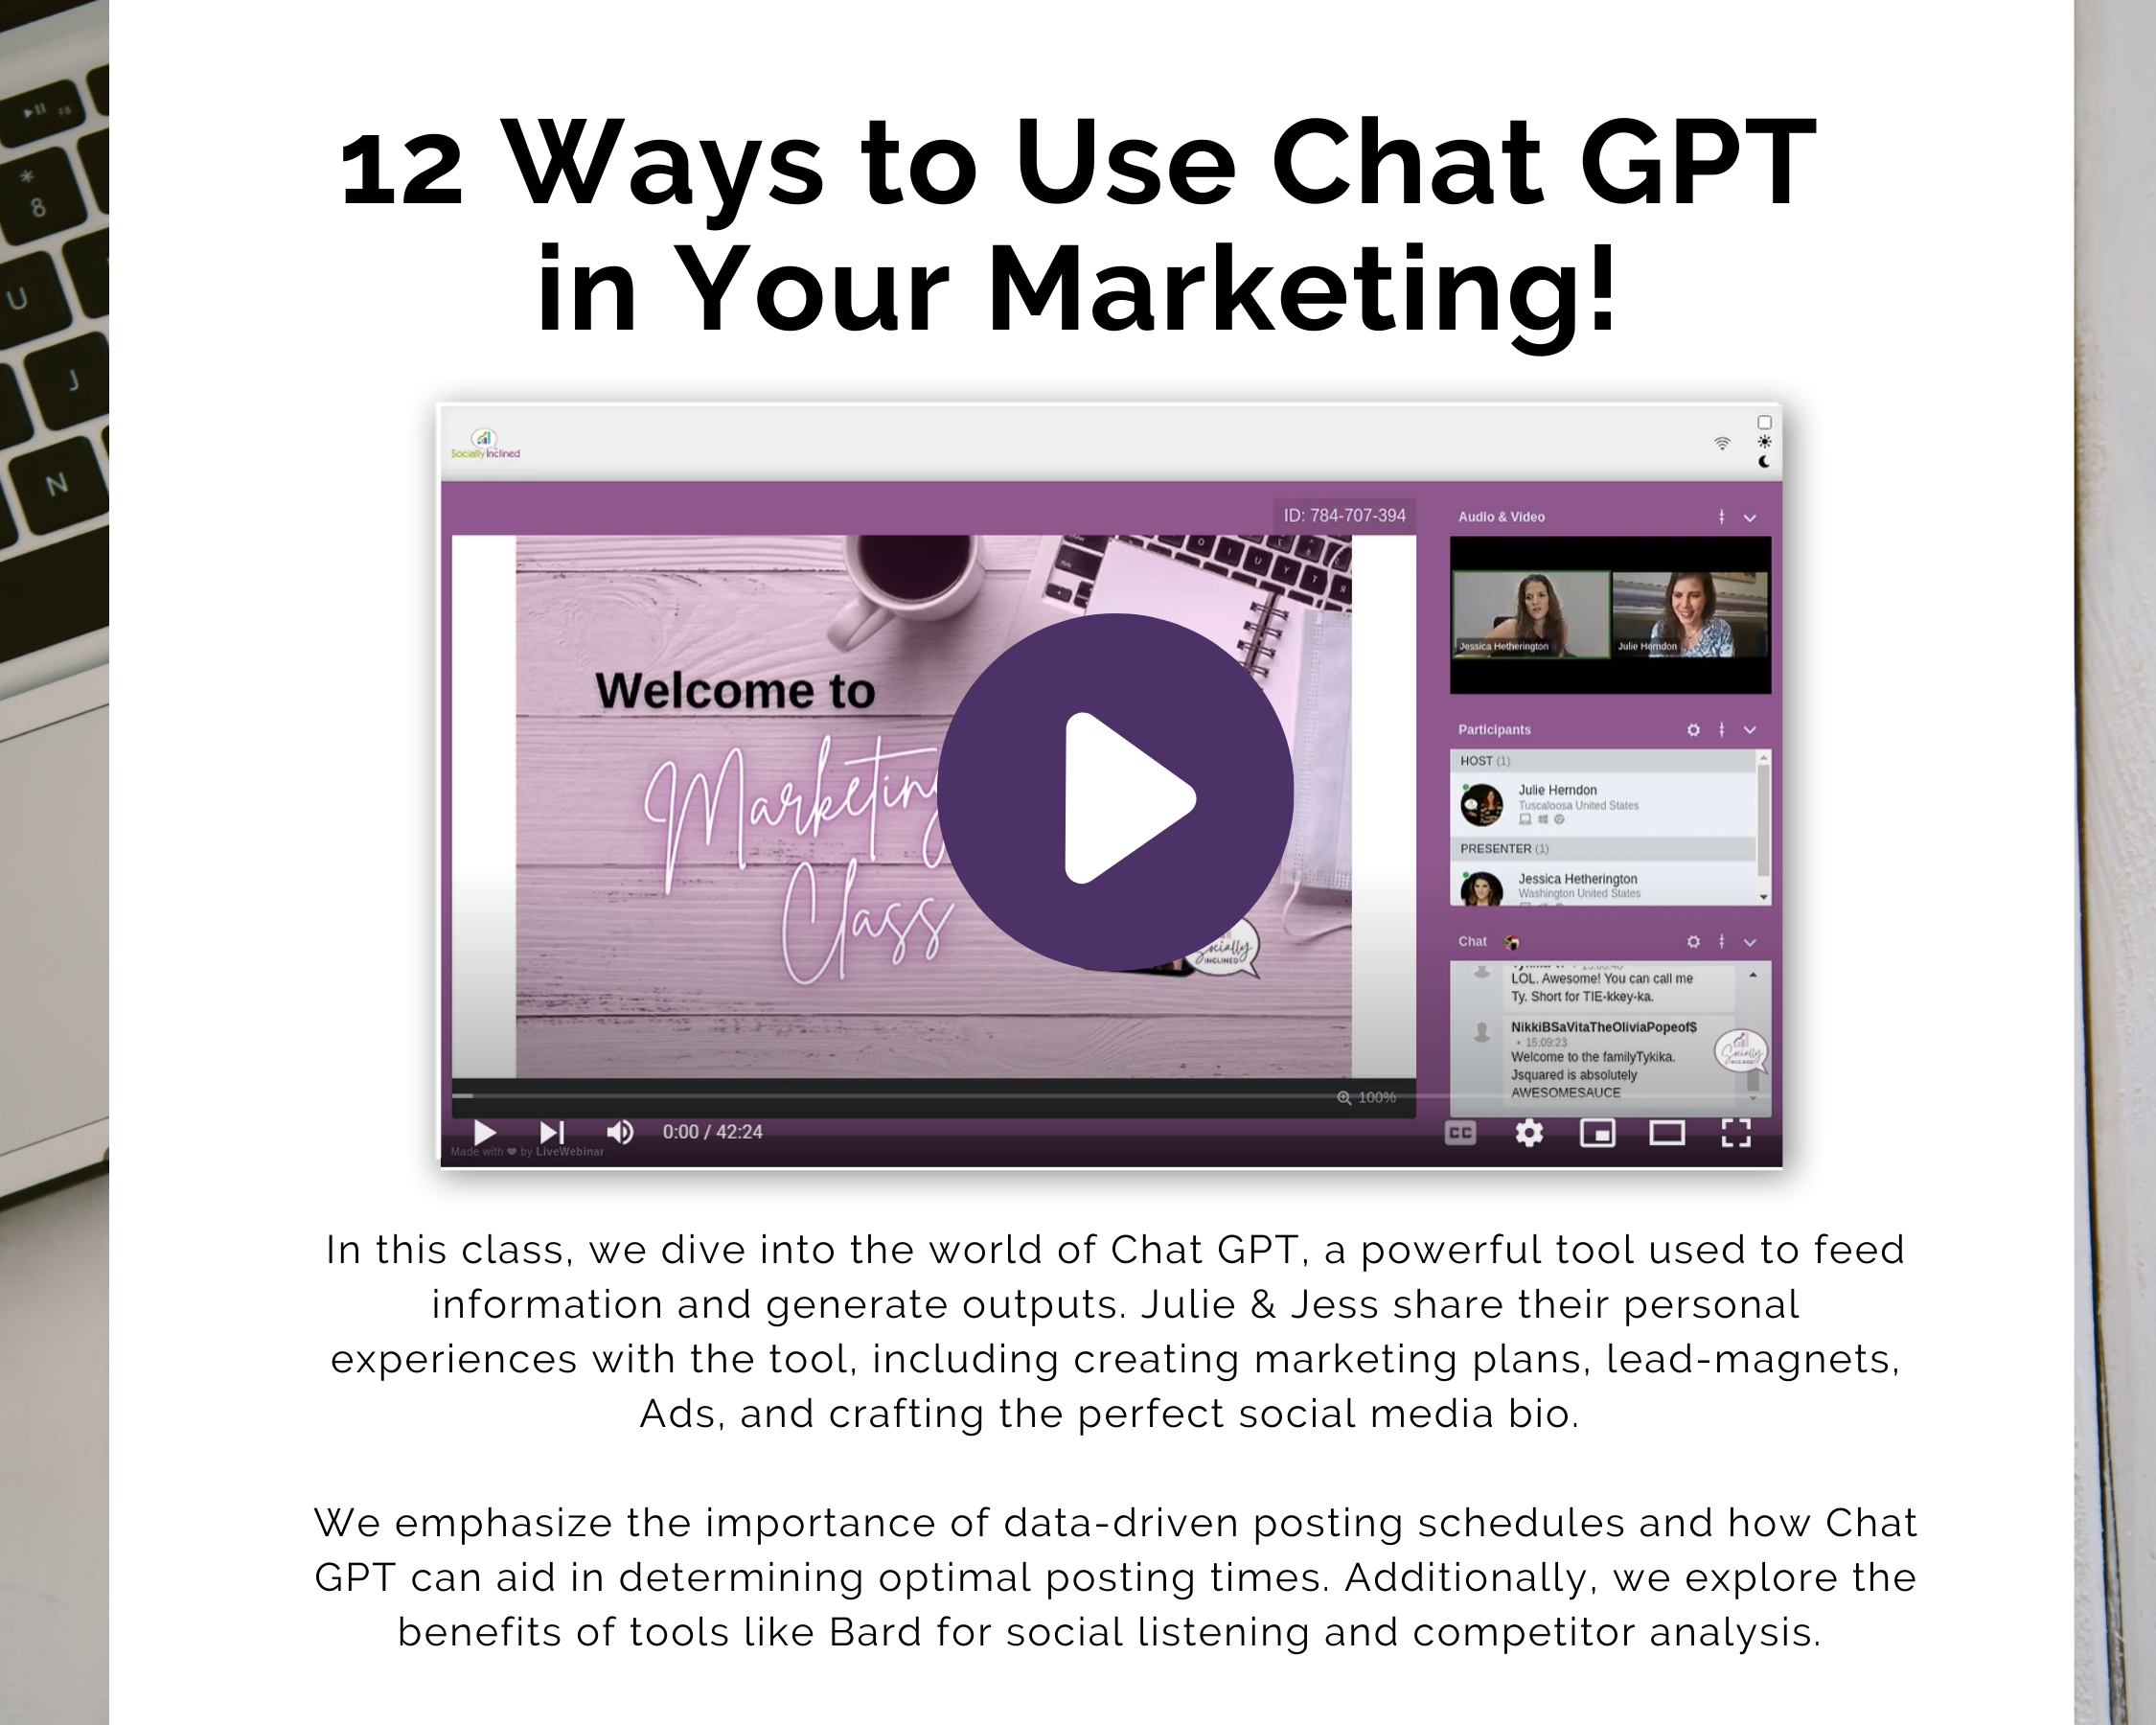 Chat GPT Marketing 101: The Essential Course for Small Business Owners